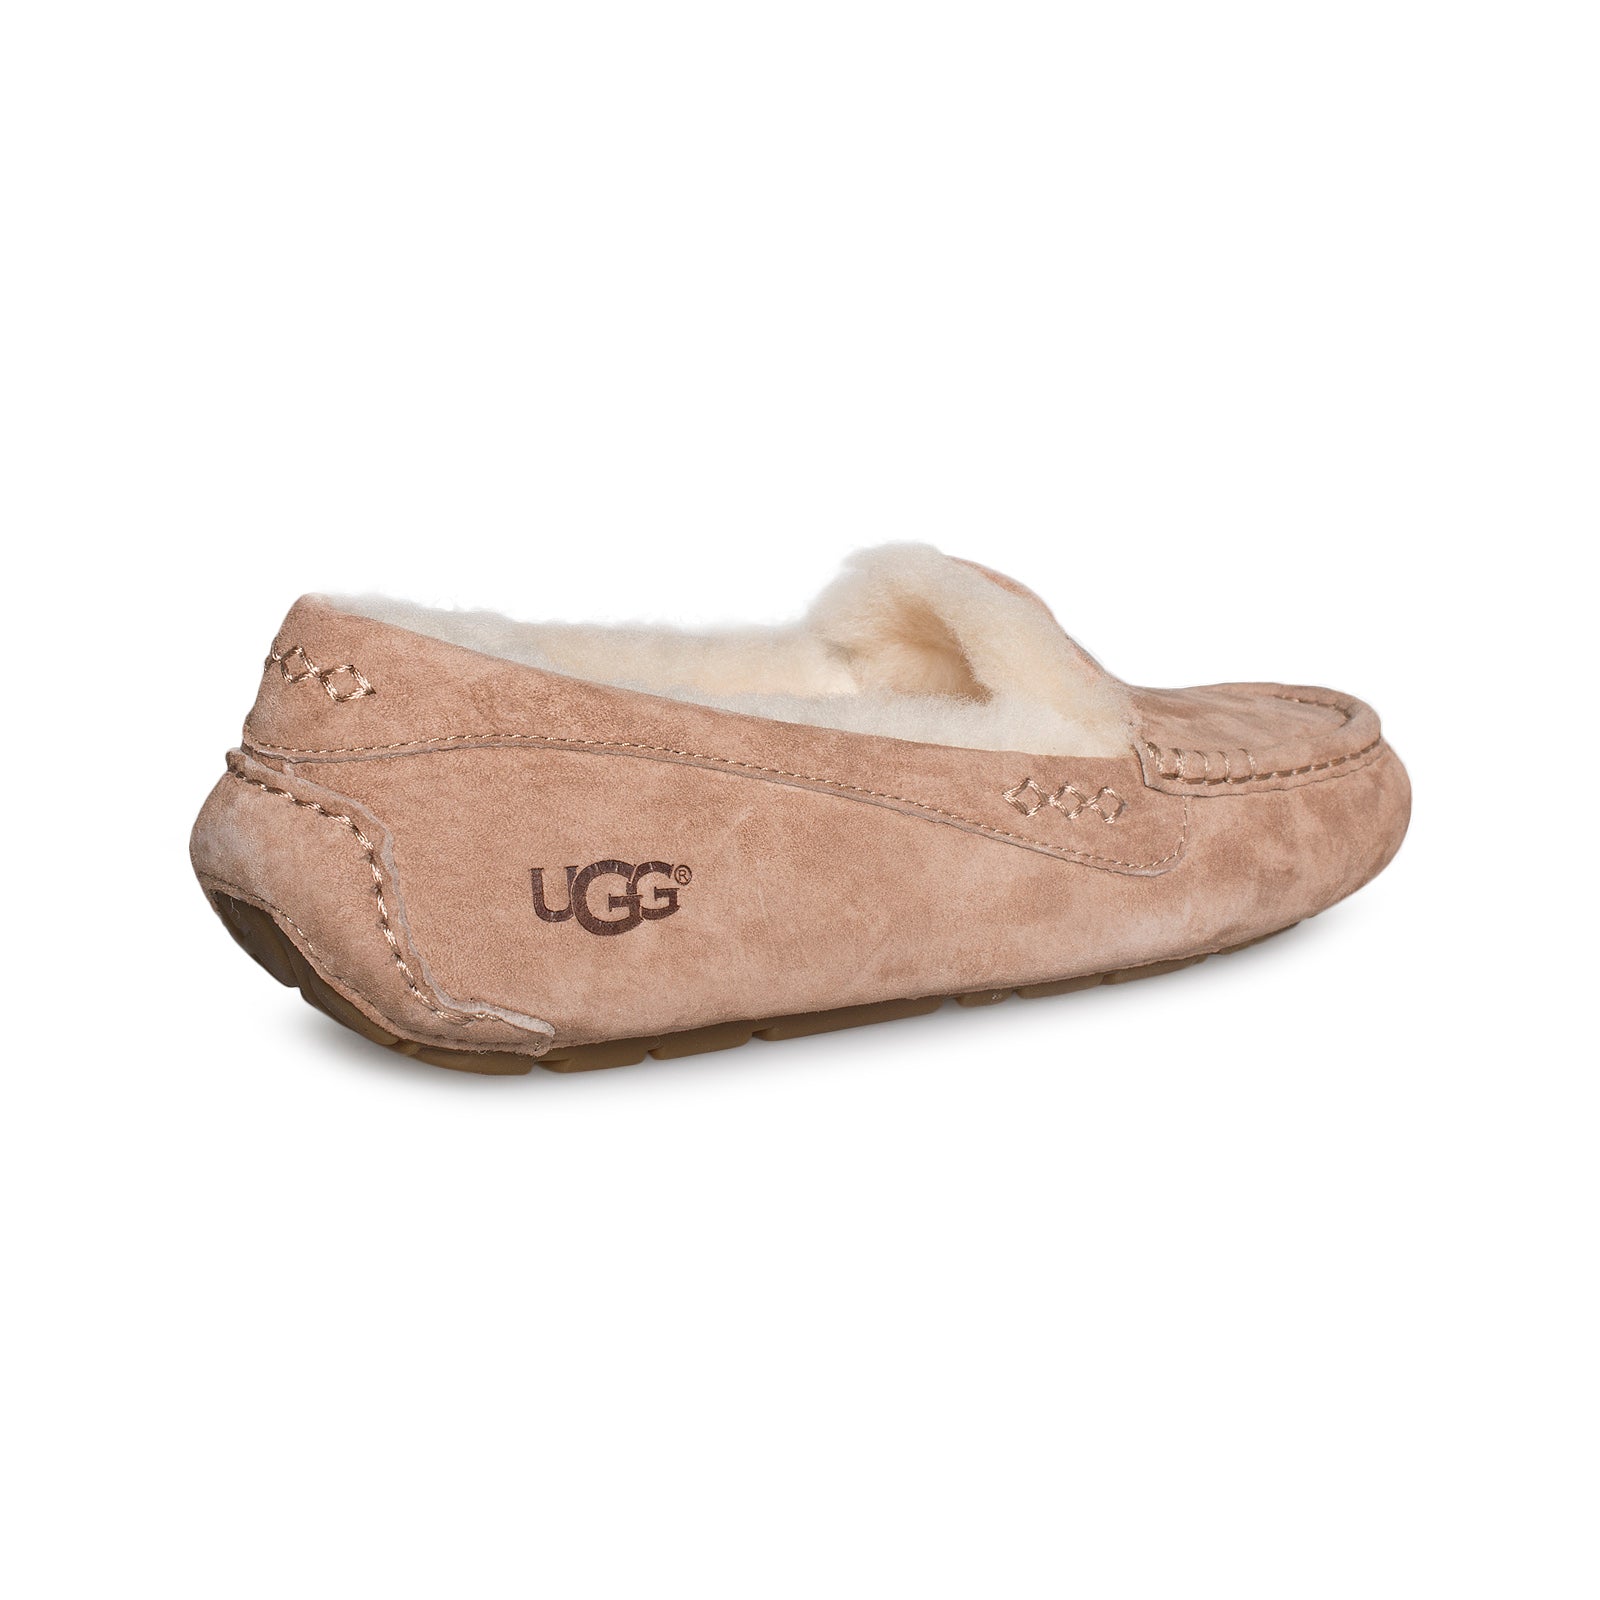 UGG Ansley Fawn Slippers - Women's 